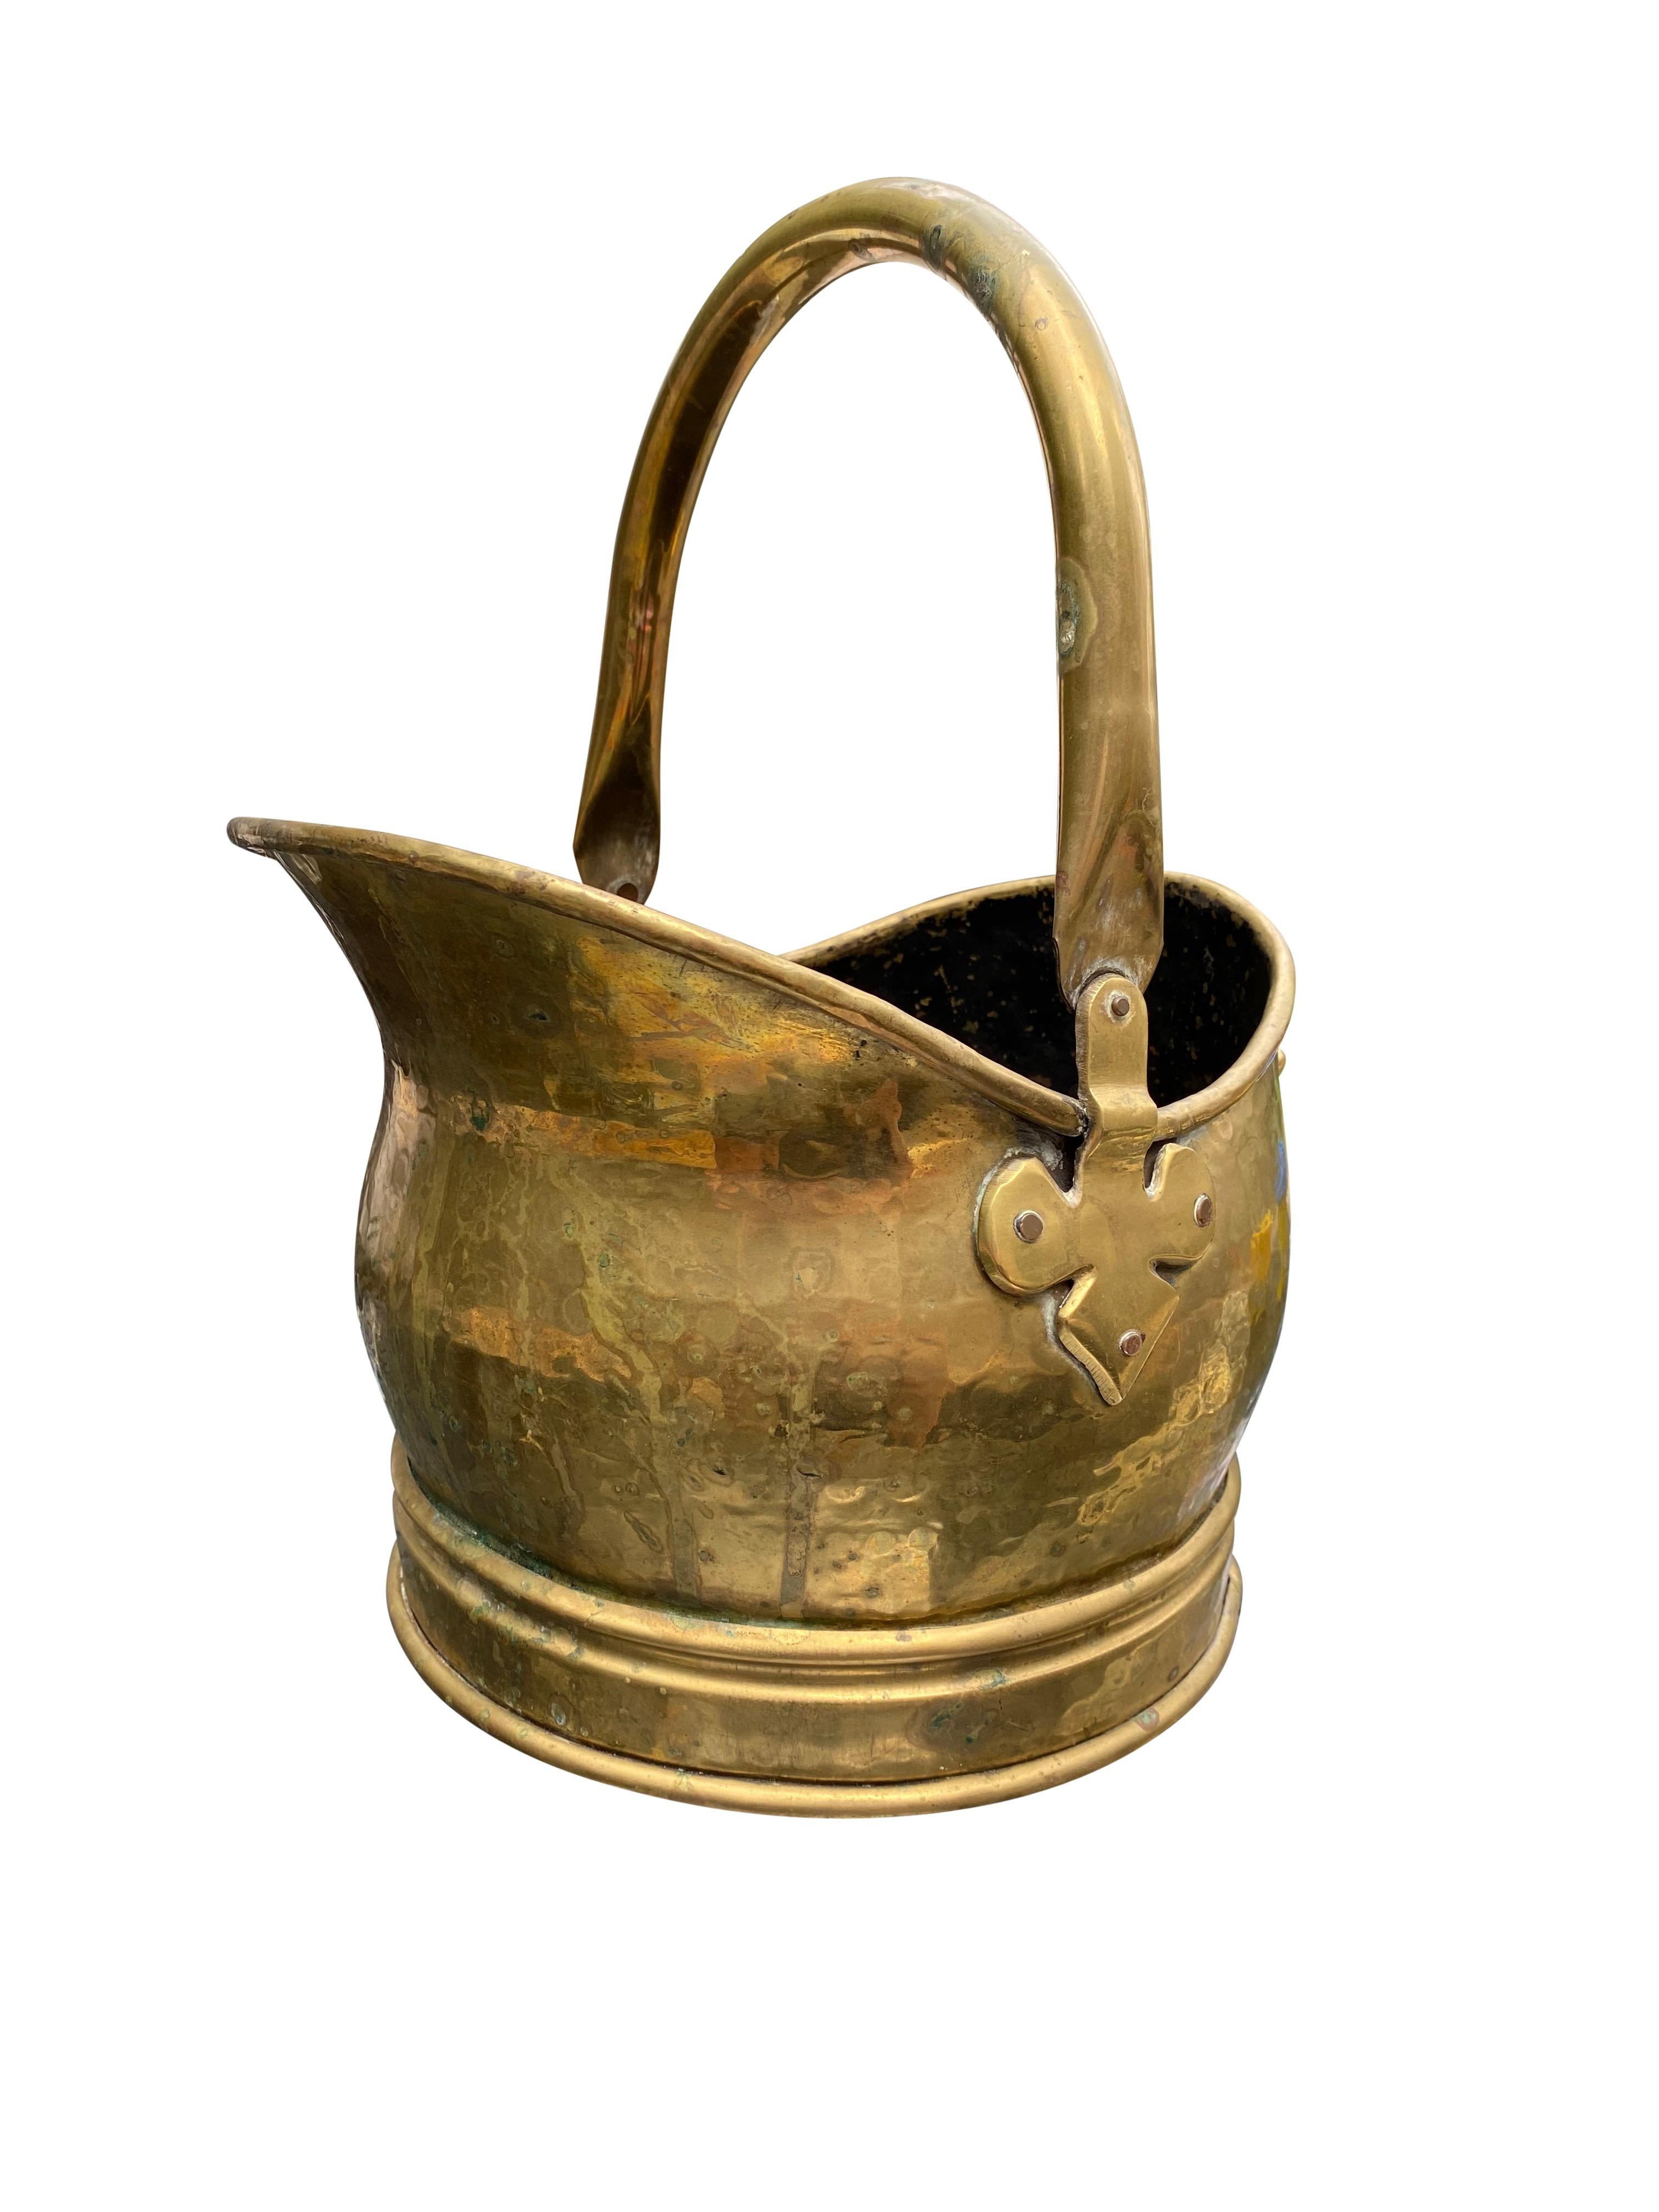 A beautiful antique late Victorian brass coal bucket with fleur-de-lis fittings, circa 1900. The bucket is offered with fantastic patina, and a perfect ageing look. Great for interior design and home decoration. The bucket has a top and rear handle,